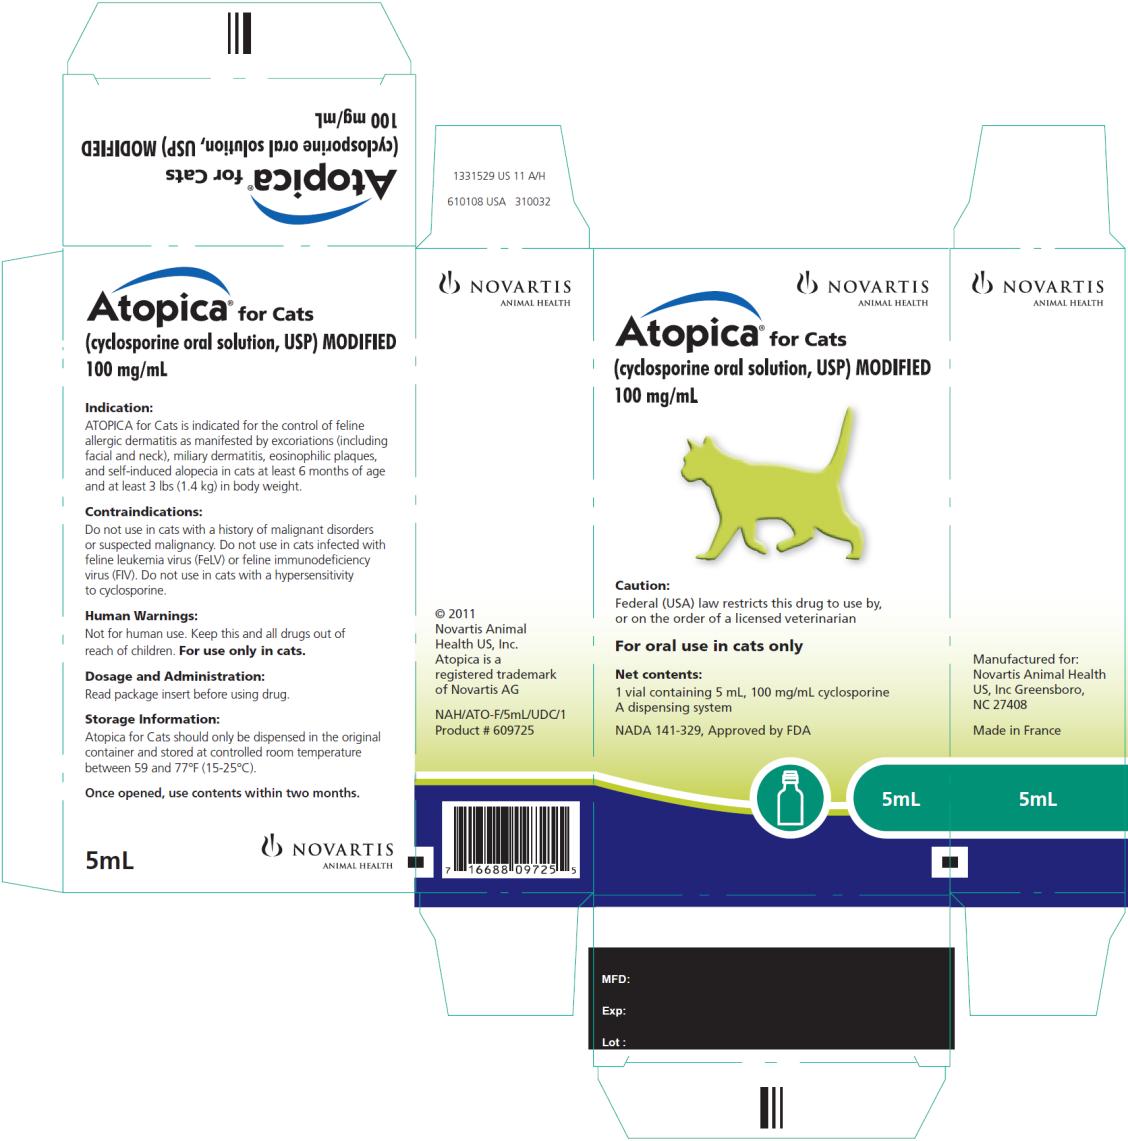 PRINCIPAL DISPLAY PANEL
NOVARTIS ANIMAL HEALTH
Atopica® for Cats
(cyclosporine oral solution, USP) MODIFIED
100 mg/mL
Caution:
Federal (USA) law restricts this drug to use by,
or on the order of a licensed veterinarian
For oral use in cats only
Net contents:
1 vial containing 5 mL, 100 mg/mL cyclosporine
A dispensing system
NADA 141-329, Approved by FDA
5mL